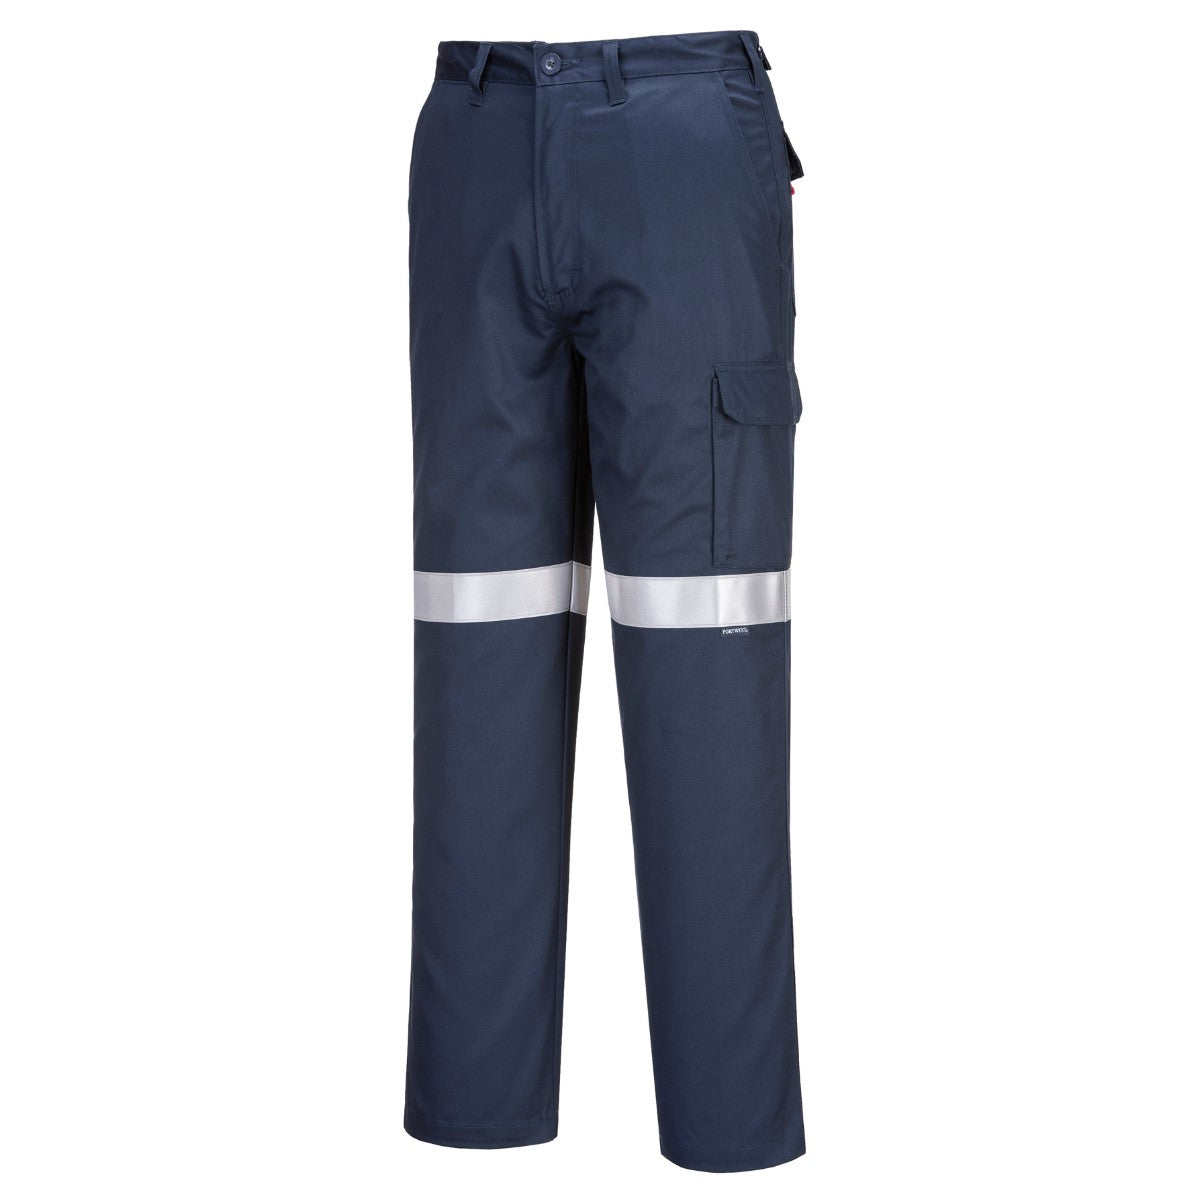 Portwest Flame Resistant Cargo Pants with Tape MW701